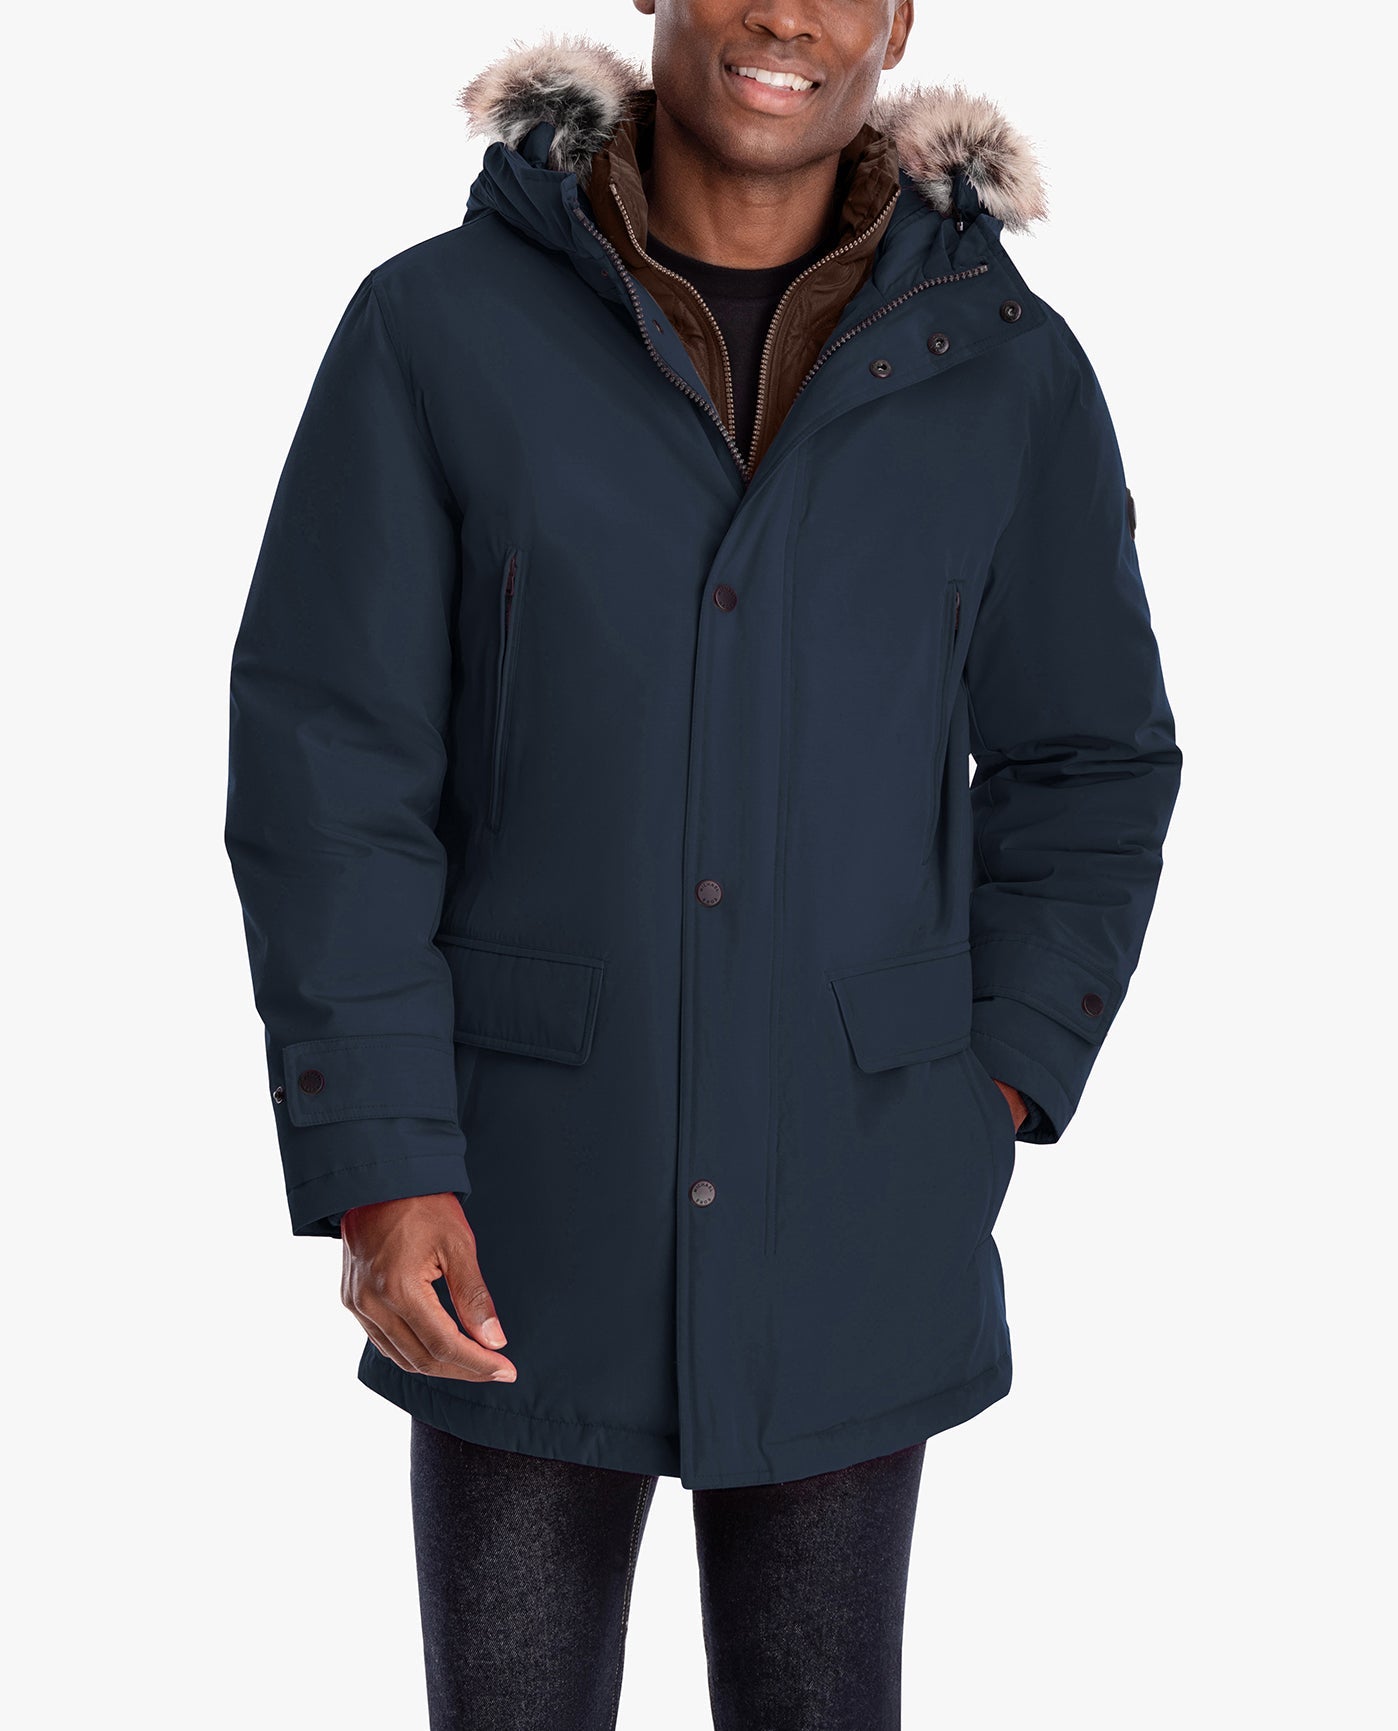 SIDE VIEW OF ARTIC PARKA WITH REMOVABLE FAUX FUR TRIMMED HOOD | MIDNIGHT BLUE